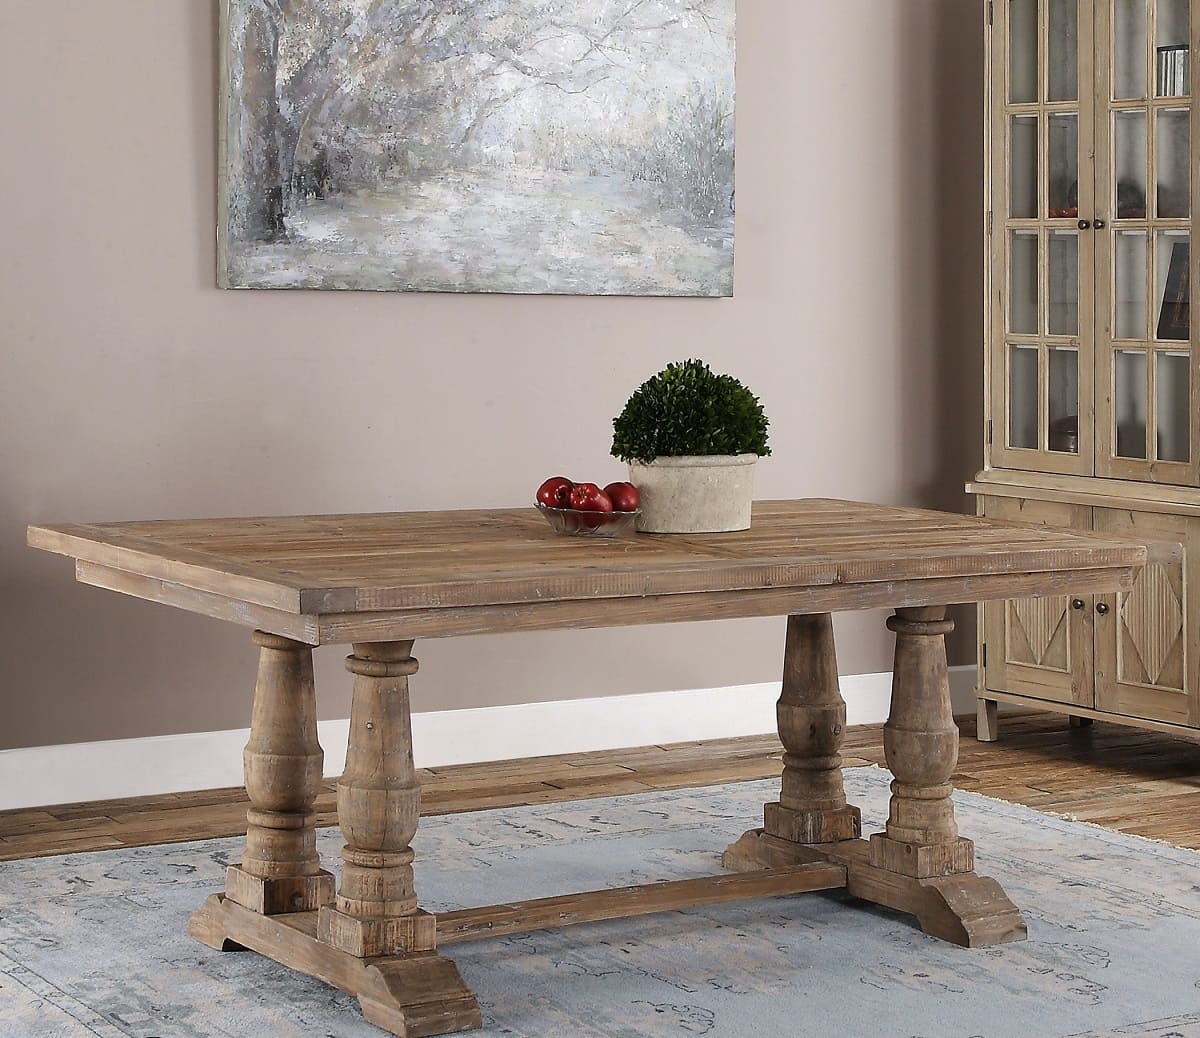 How Can You Construct A Dining Room Table?